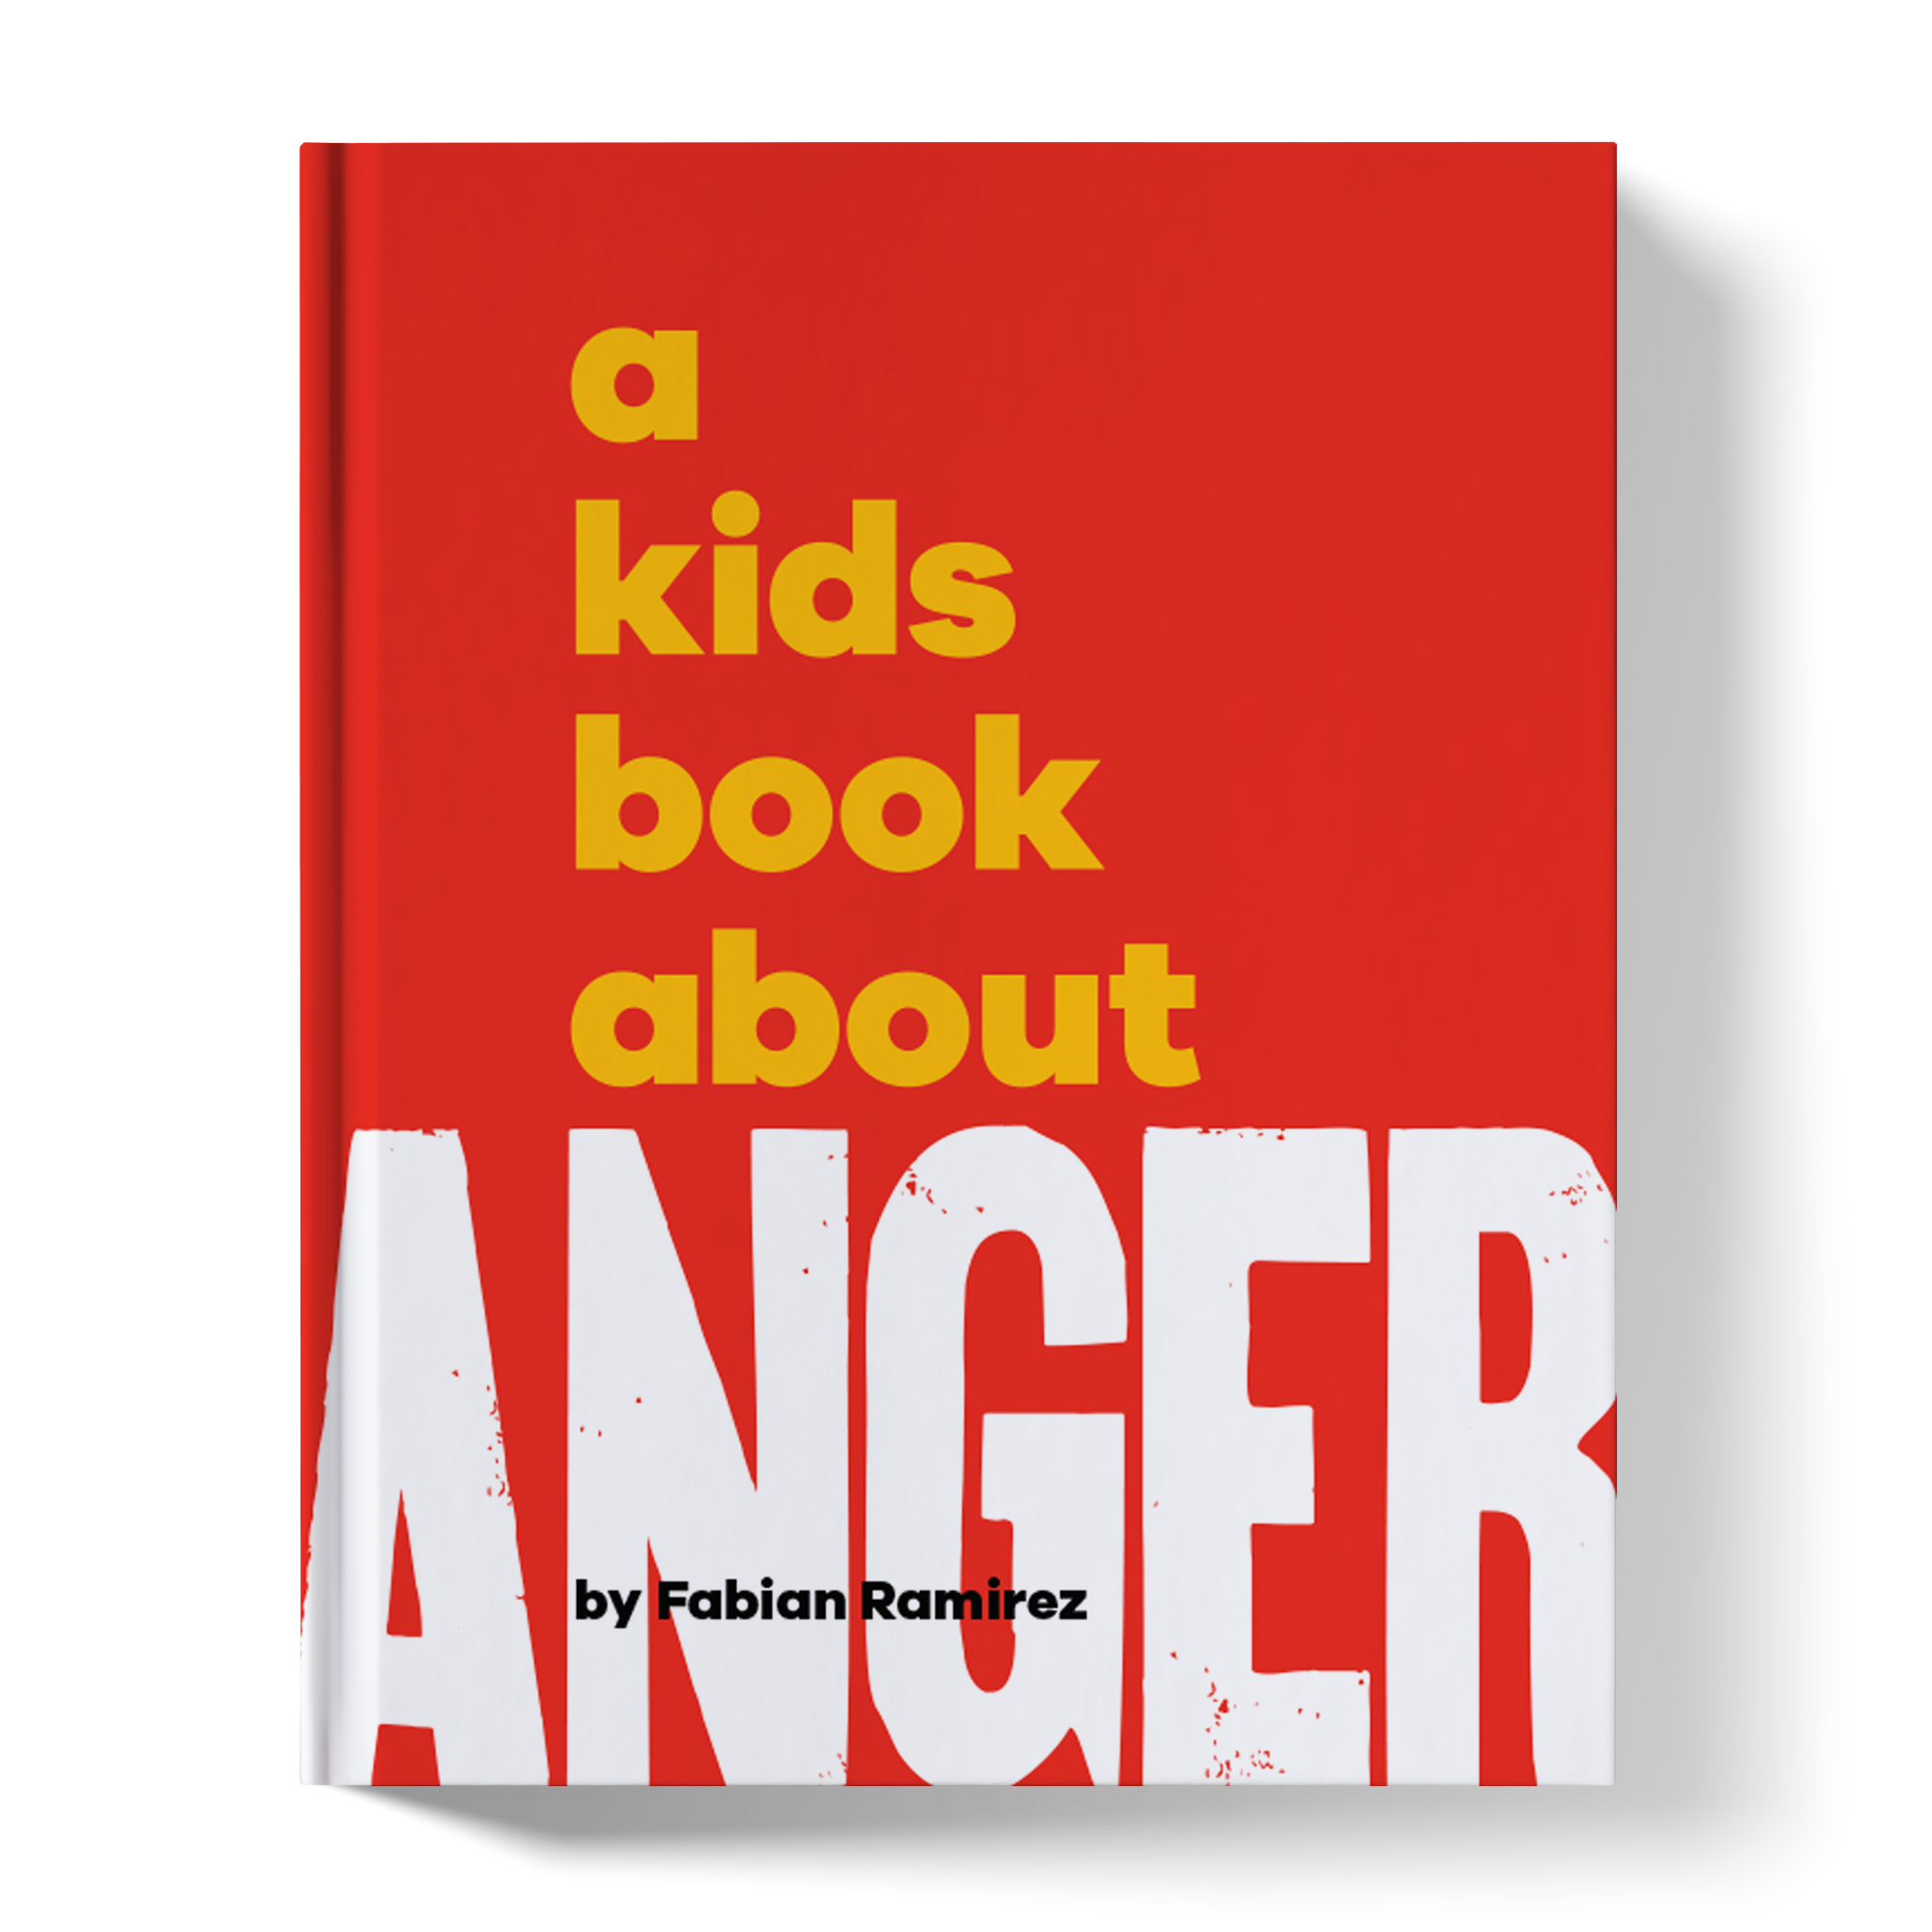 A Kids Book About Anger